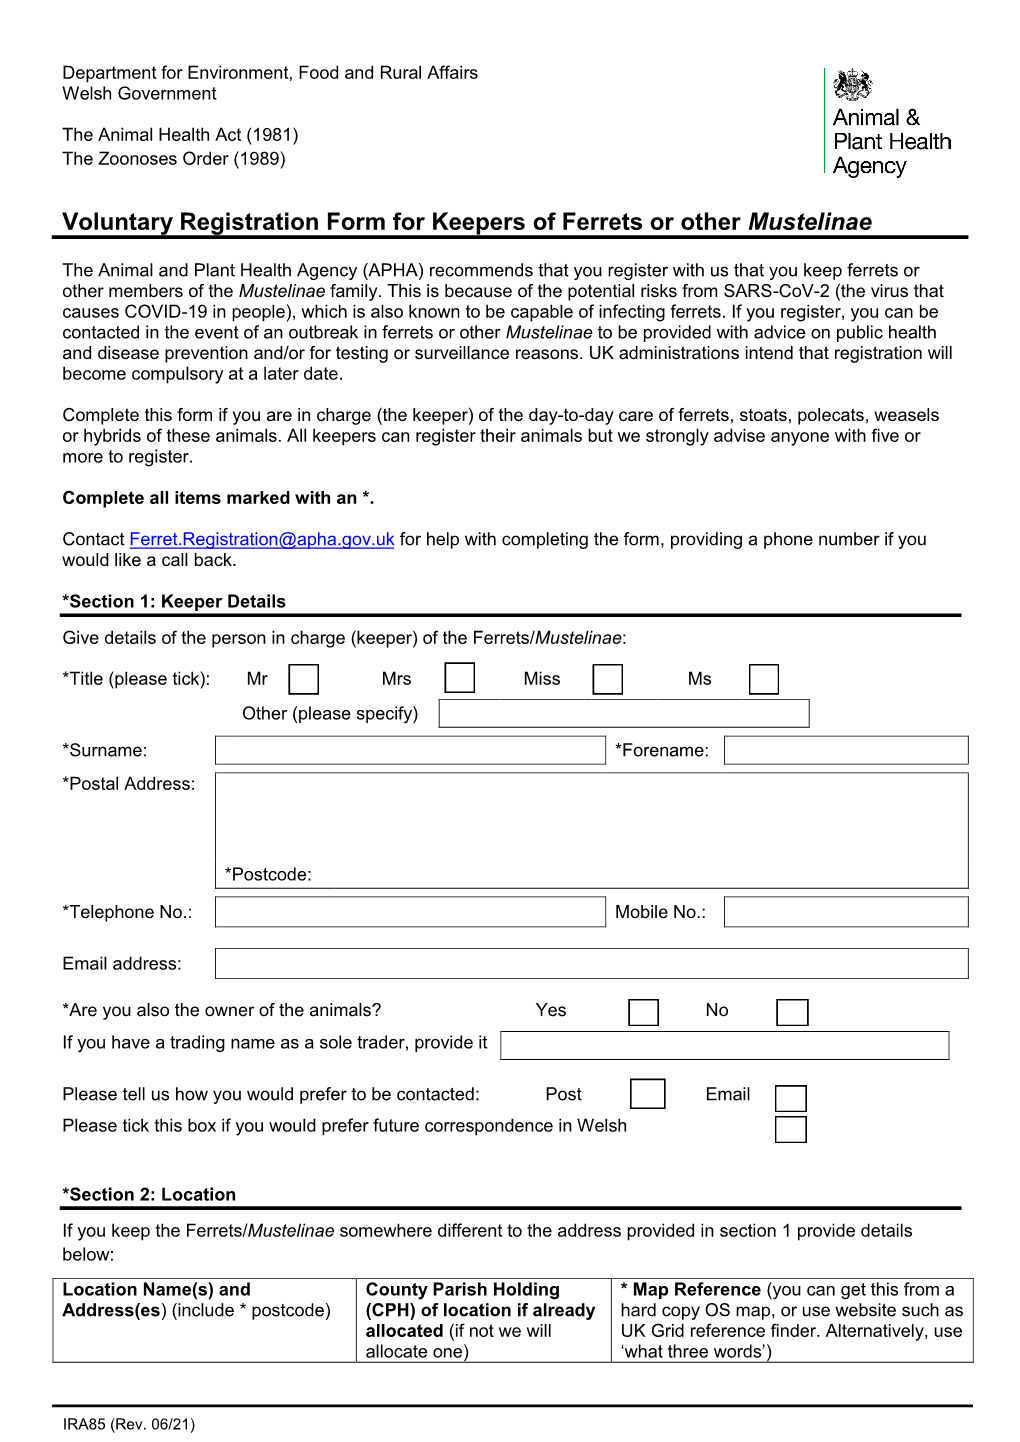 Voluntary Registration Form for Keepers of Ferrets Or Other Mustelinae